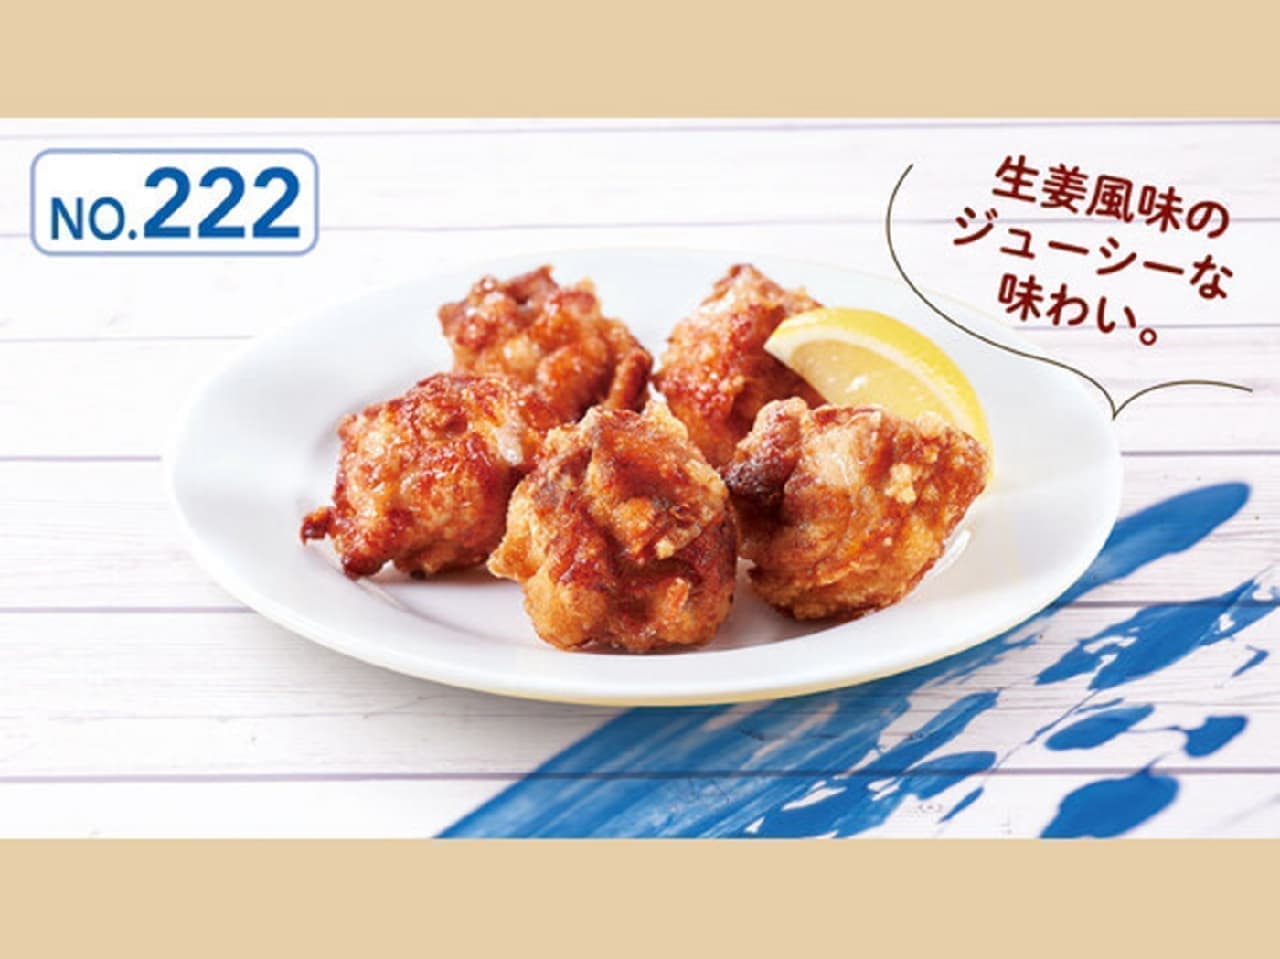 Gusto "Fried young chicken (5 pieces)